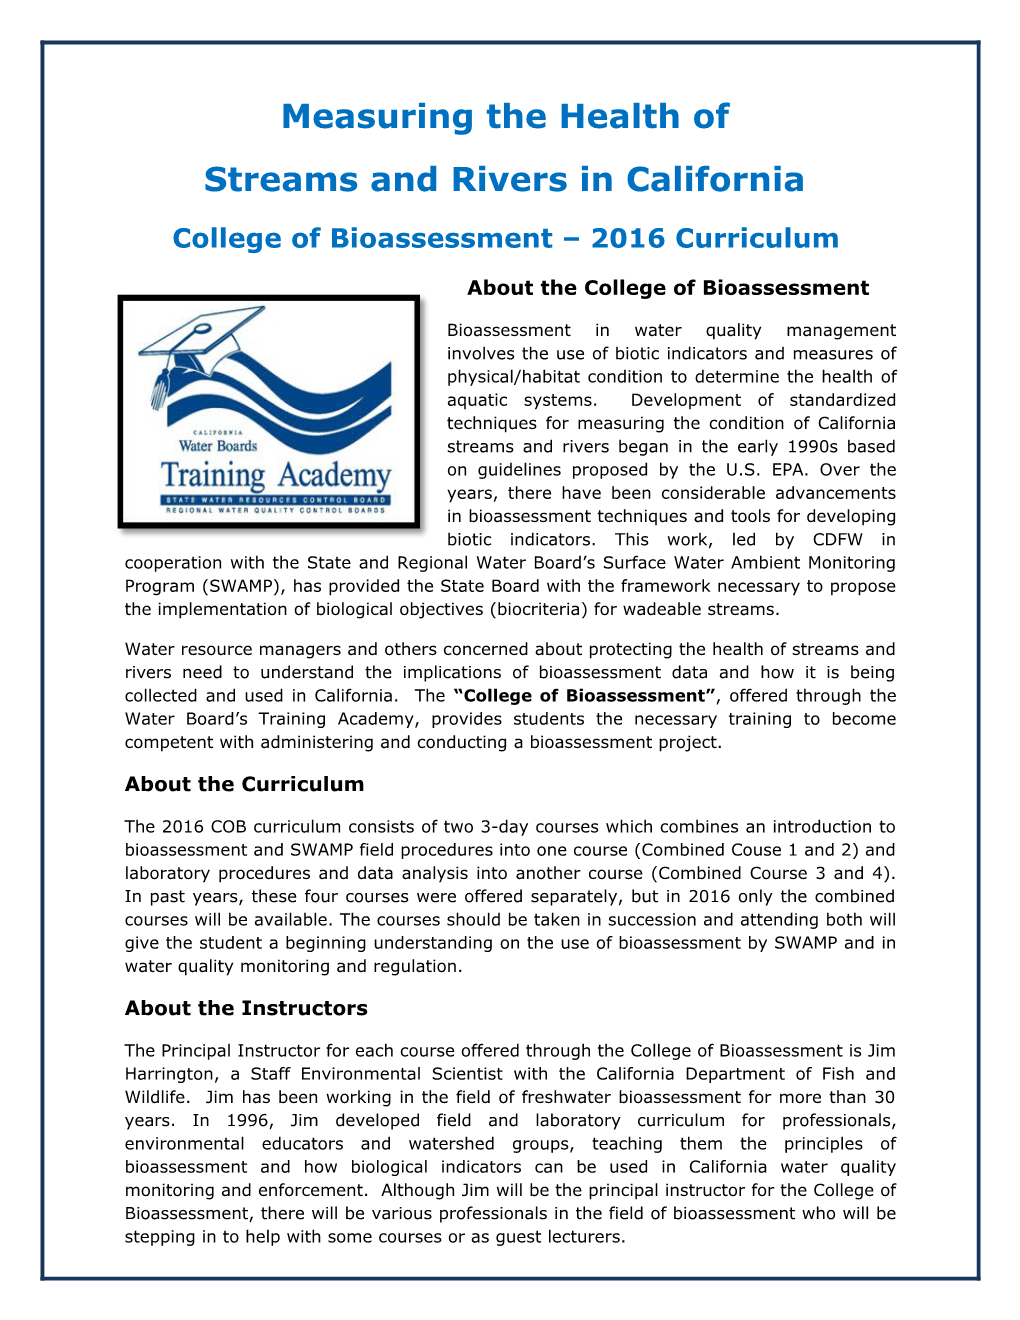 An Introduction to Techniques for Measuring the Health of Streams and Rivers in California